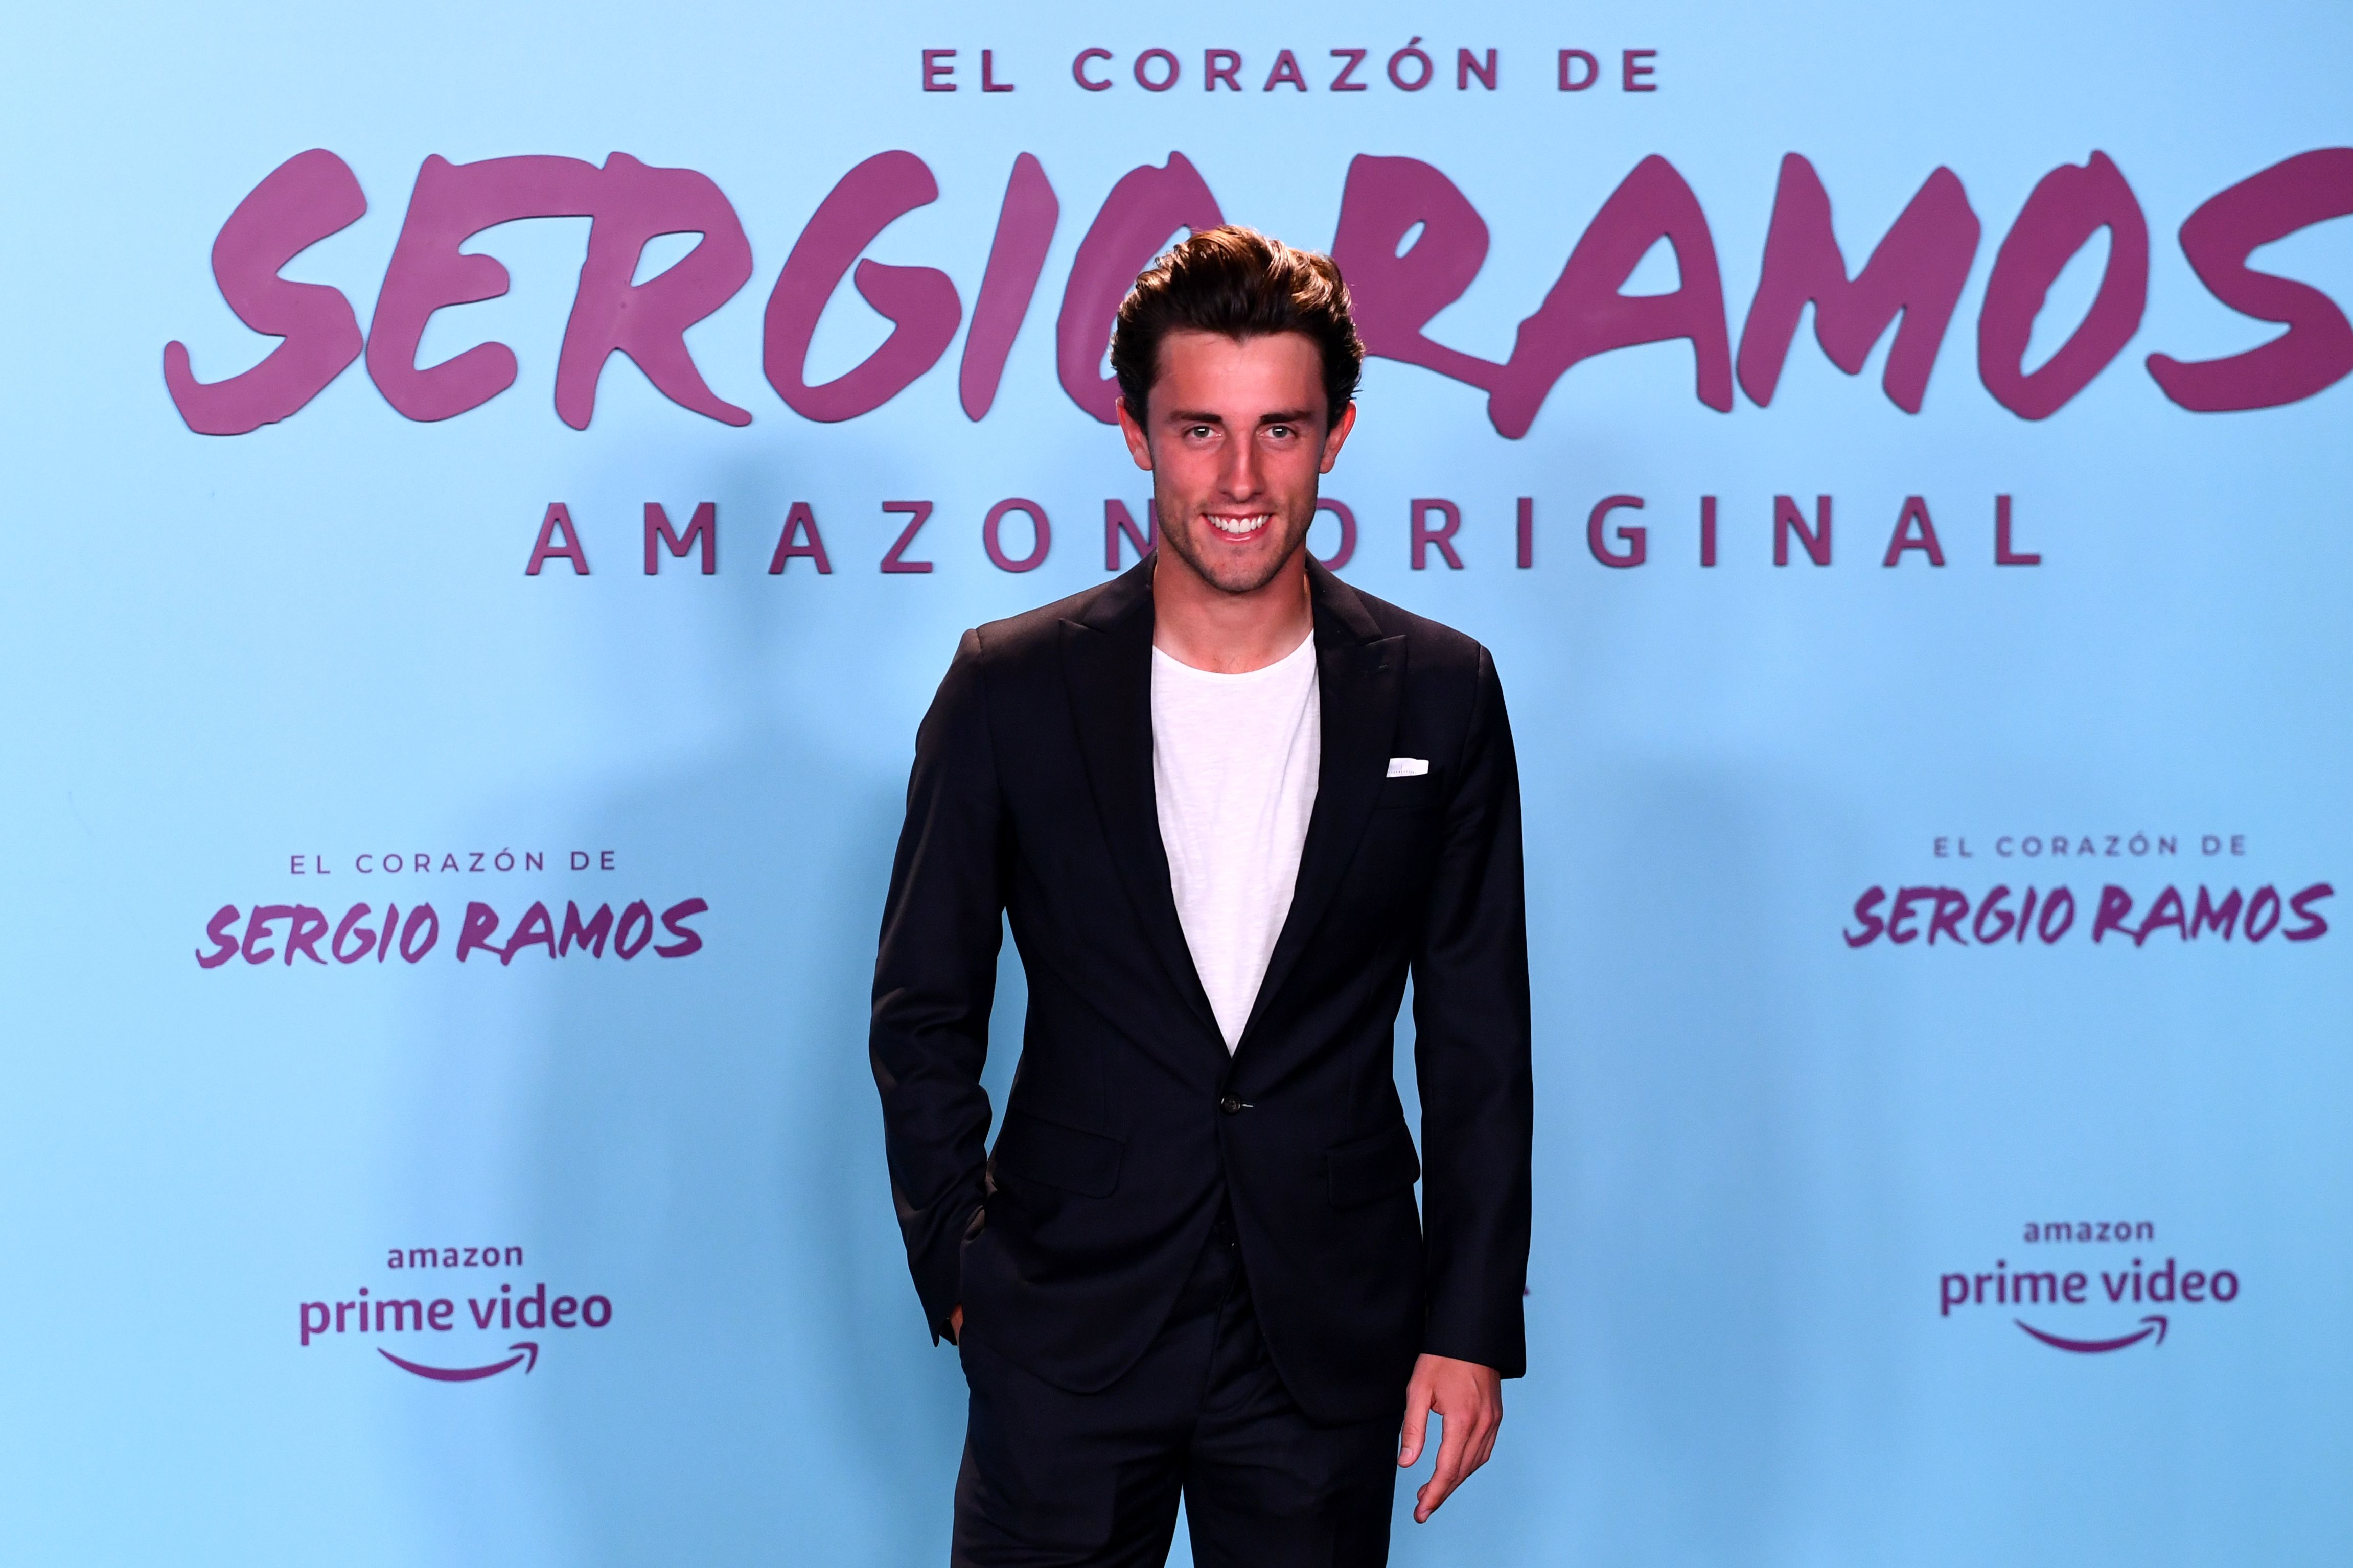 Real Madrid's Spanish defender Alvaro Odriozola poses during the premiere of Real Madrid's Spanish defender Sergio Ramos' autobiographic documentary "El Corazon de Sergio Ramos" (Sergio Ramos' heart) in Madrid, on September 10, 2019. (Photo by GABRIEL BOUYS / AFP)        (Photo credit should read GABRIEL BOUYS/AFP via Getty Images)